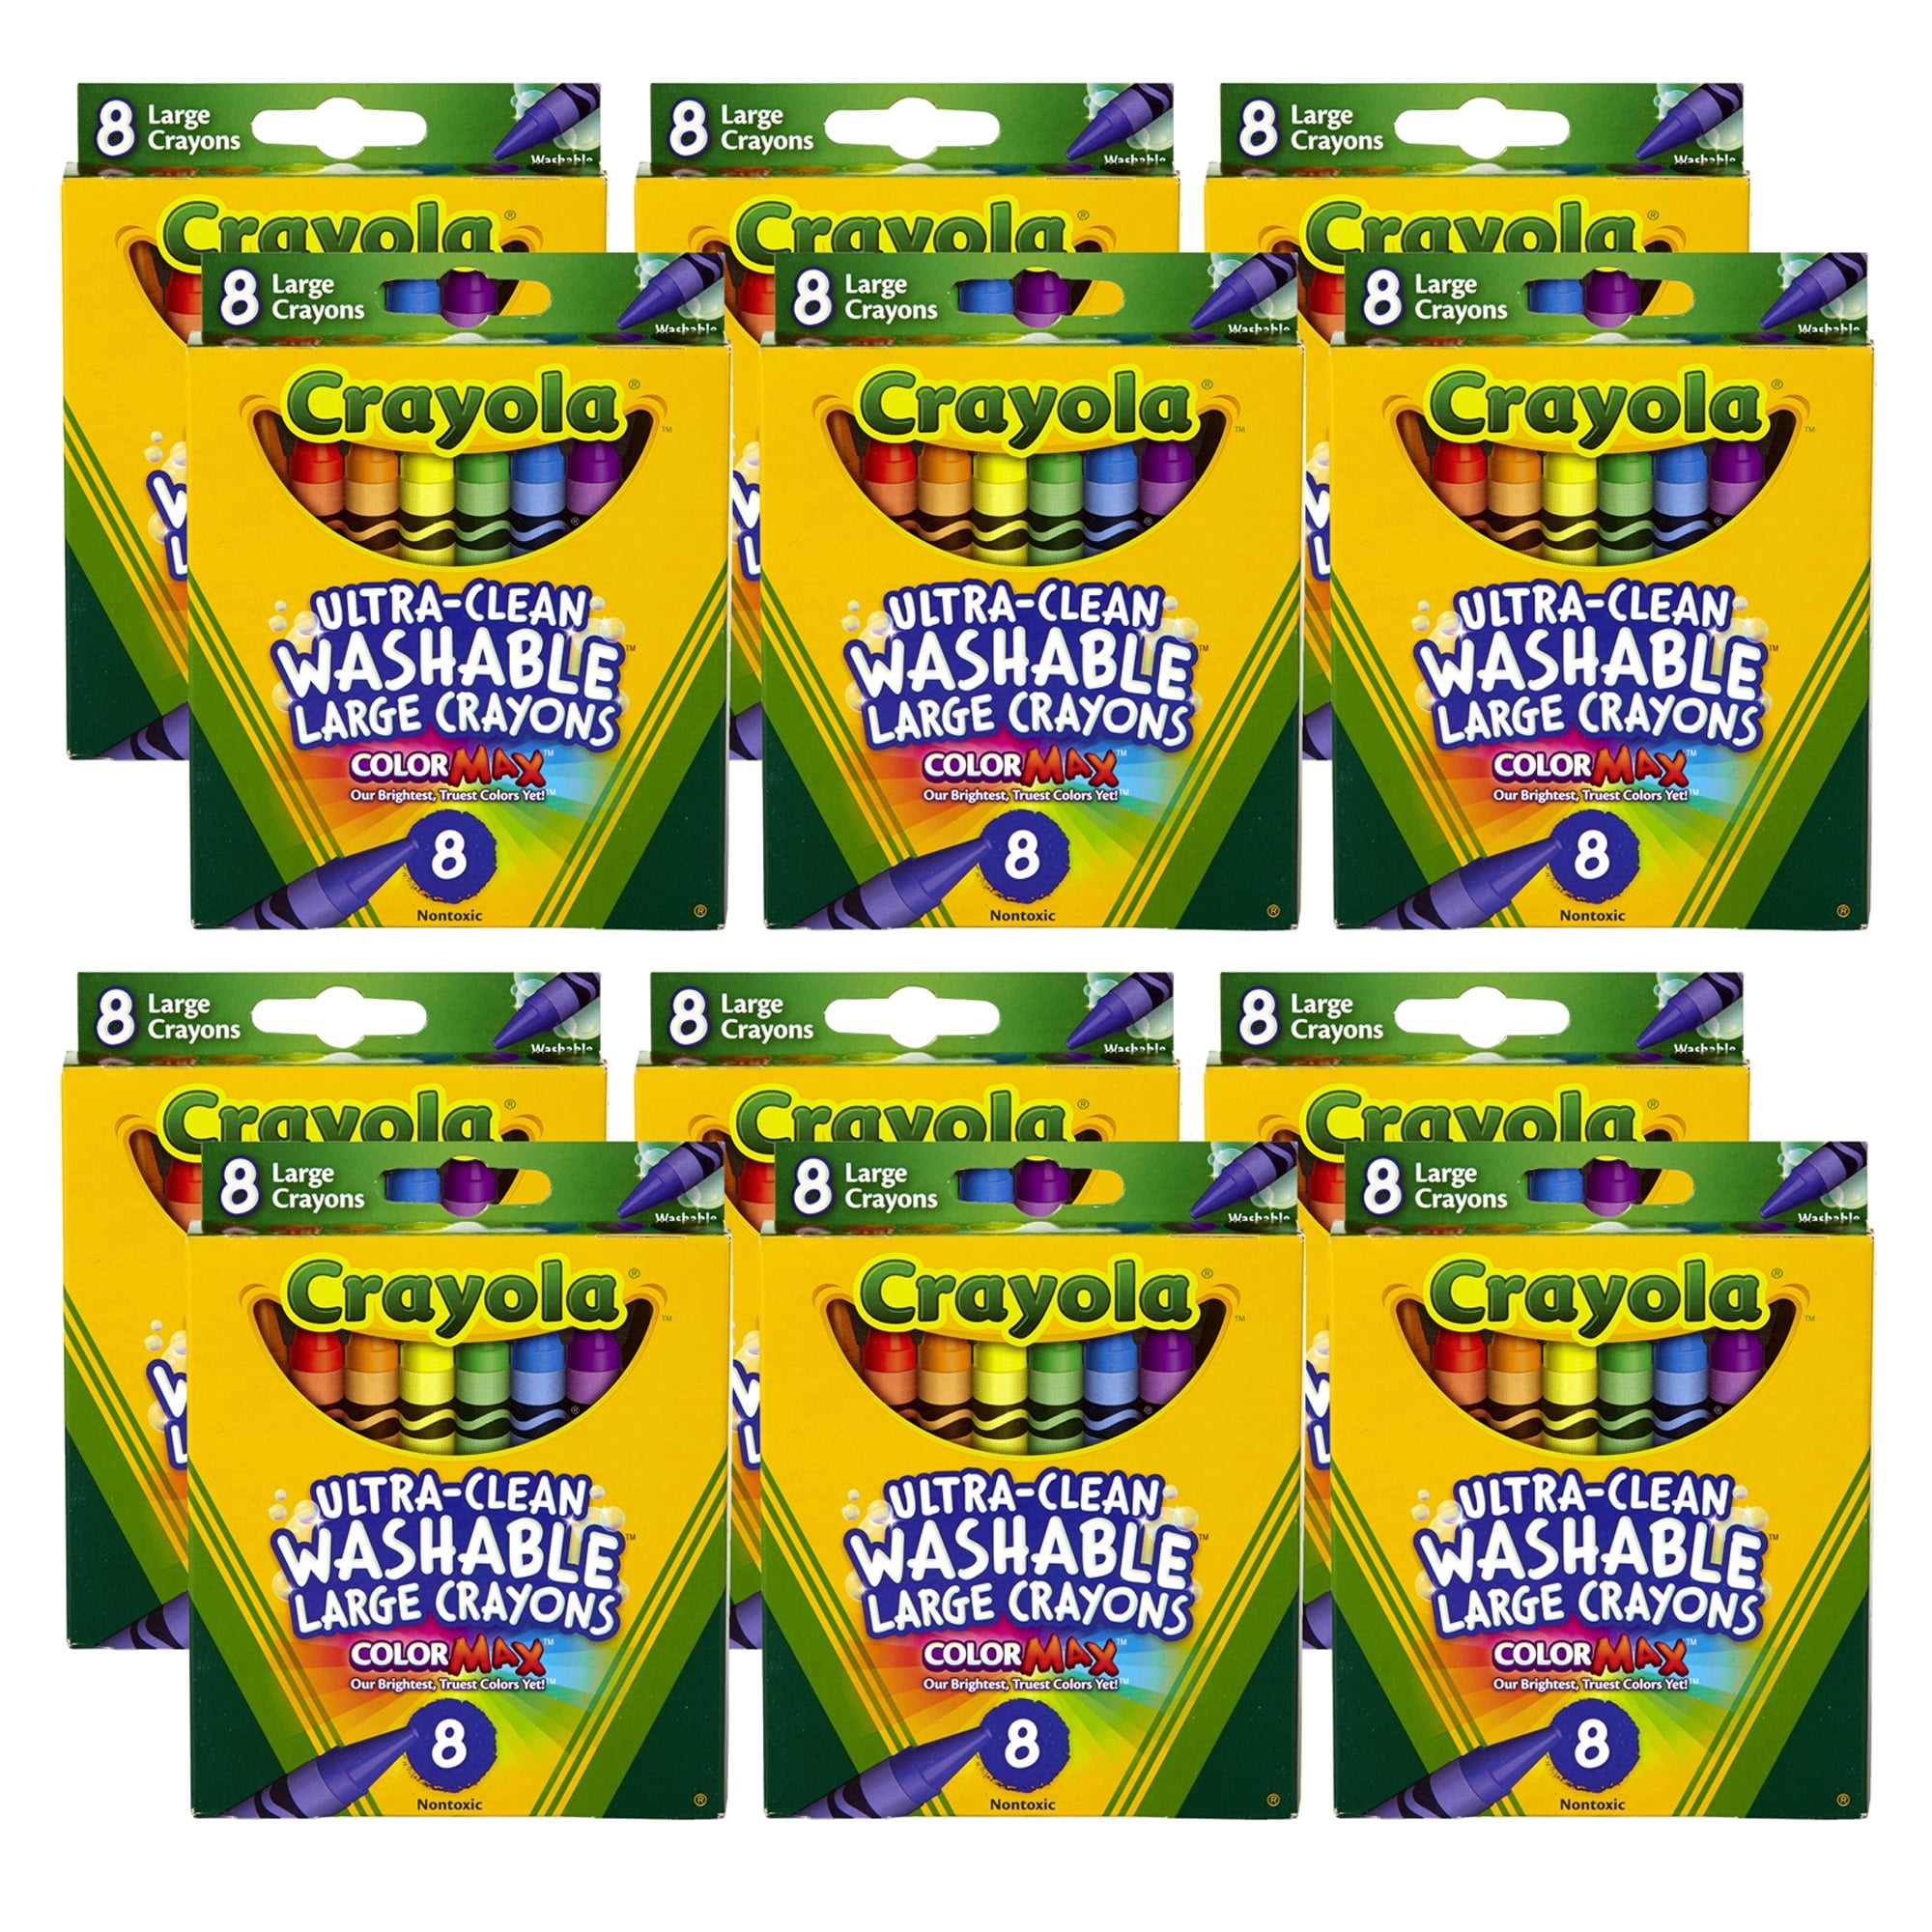 Crayola Washable Crayons, Large, Pack of 8 Colors – Preferred